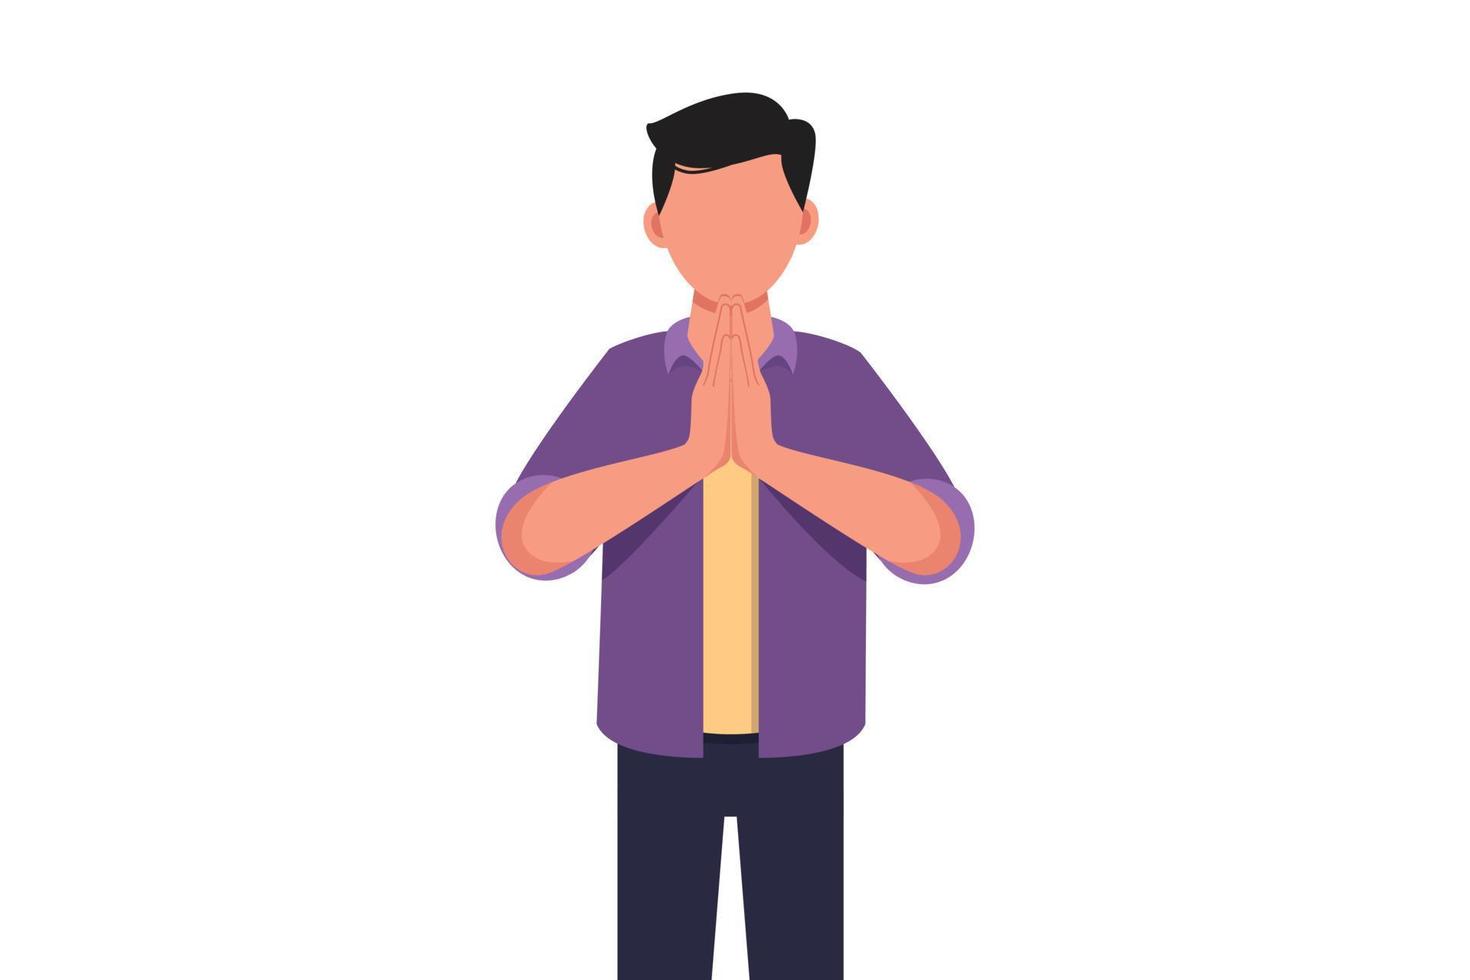 Business concept design young businessman in closed eyes praying hands together. Trendy person holding palms in prayer. Human emotion, body language gesture. Vector illustration flat cartoon style